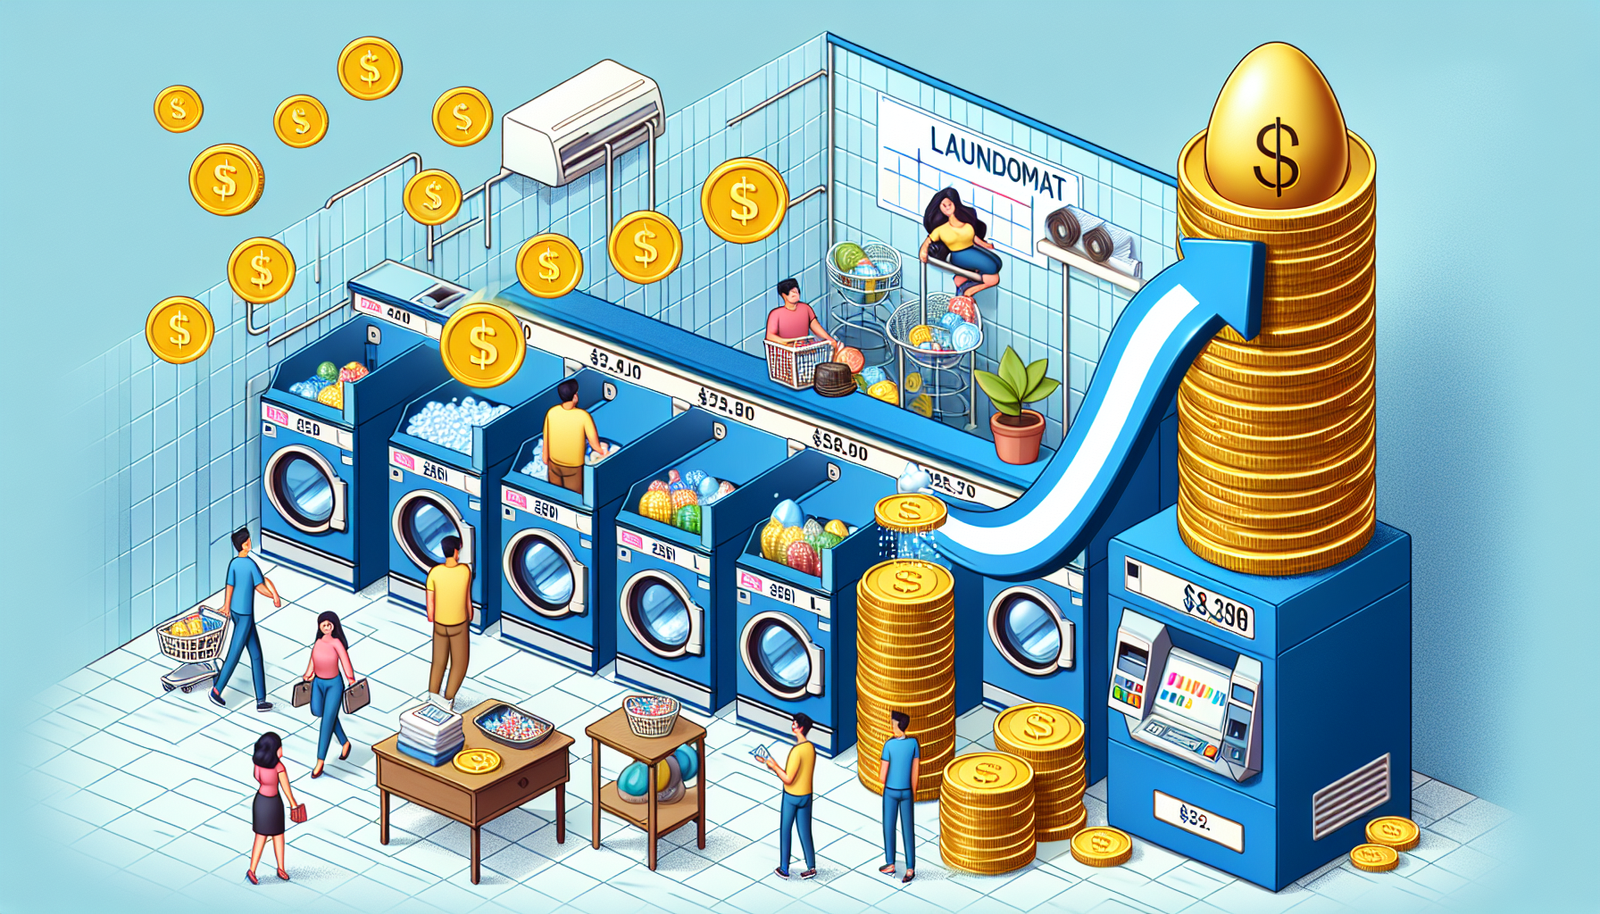 Illustration of financial aspects of a successful laundromat business